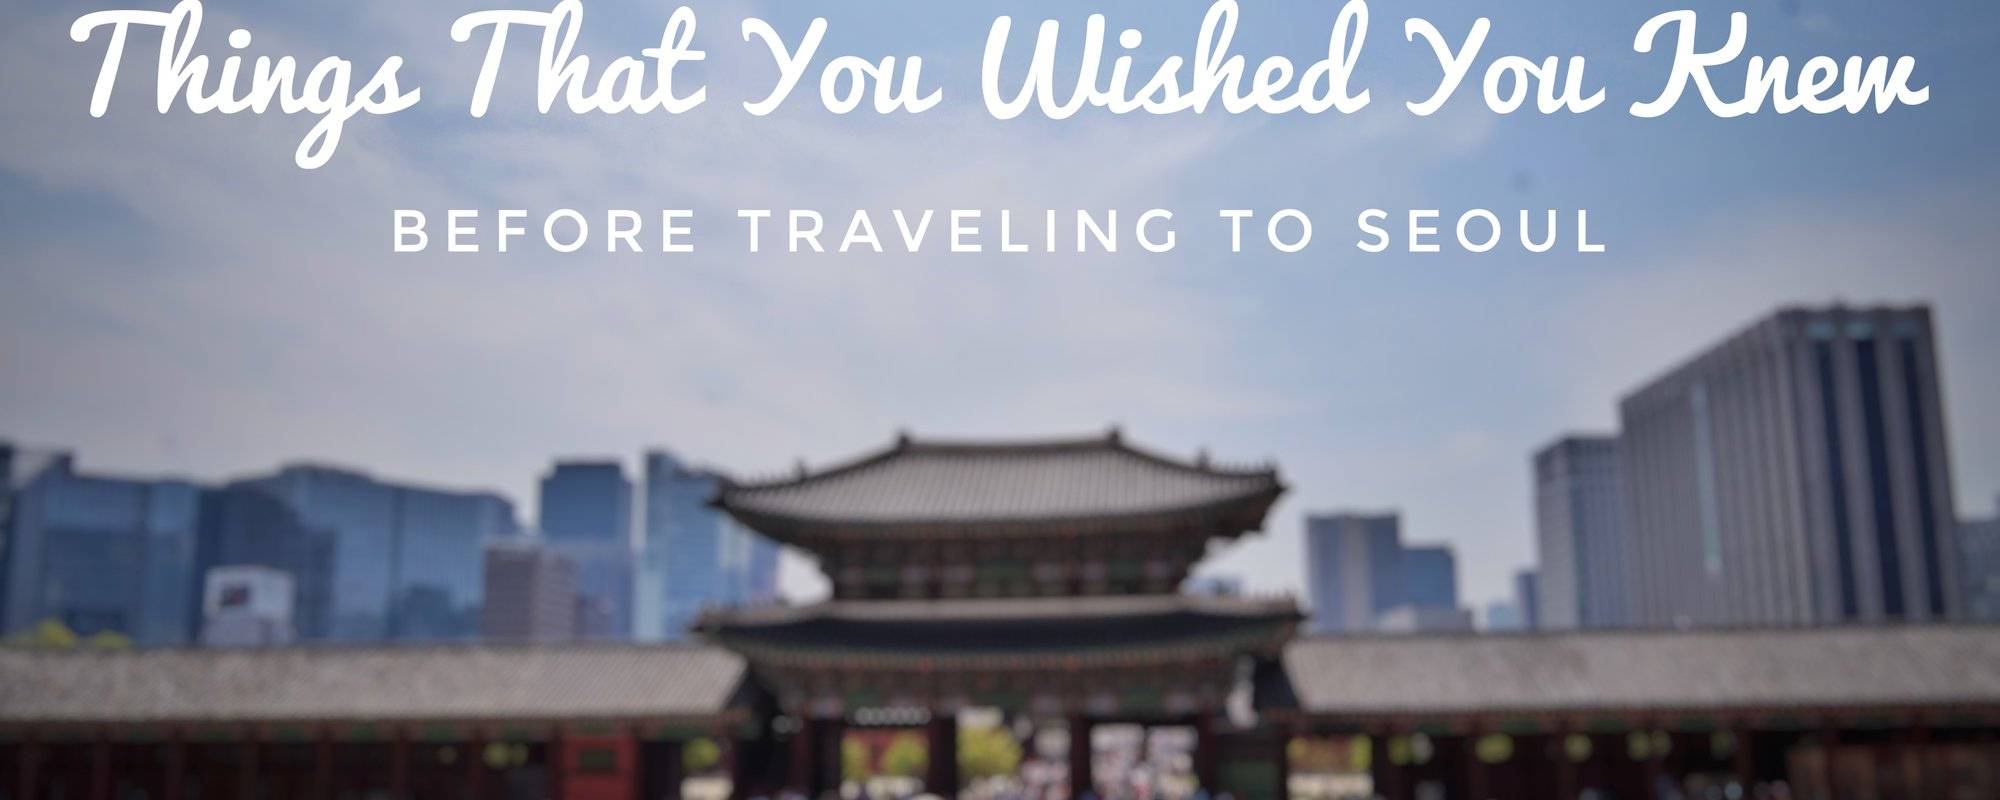 Travel Hack: 11 Things That You Wished You Knew Before Traveling To Seoul